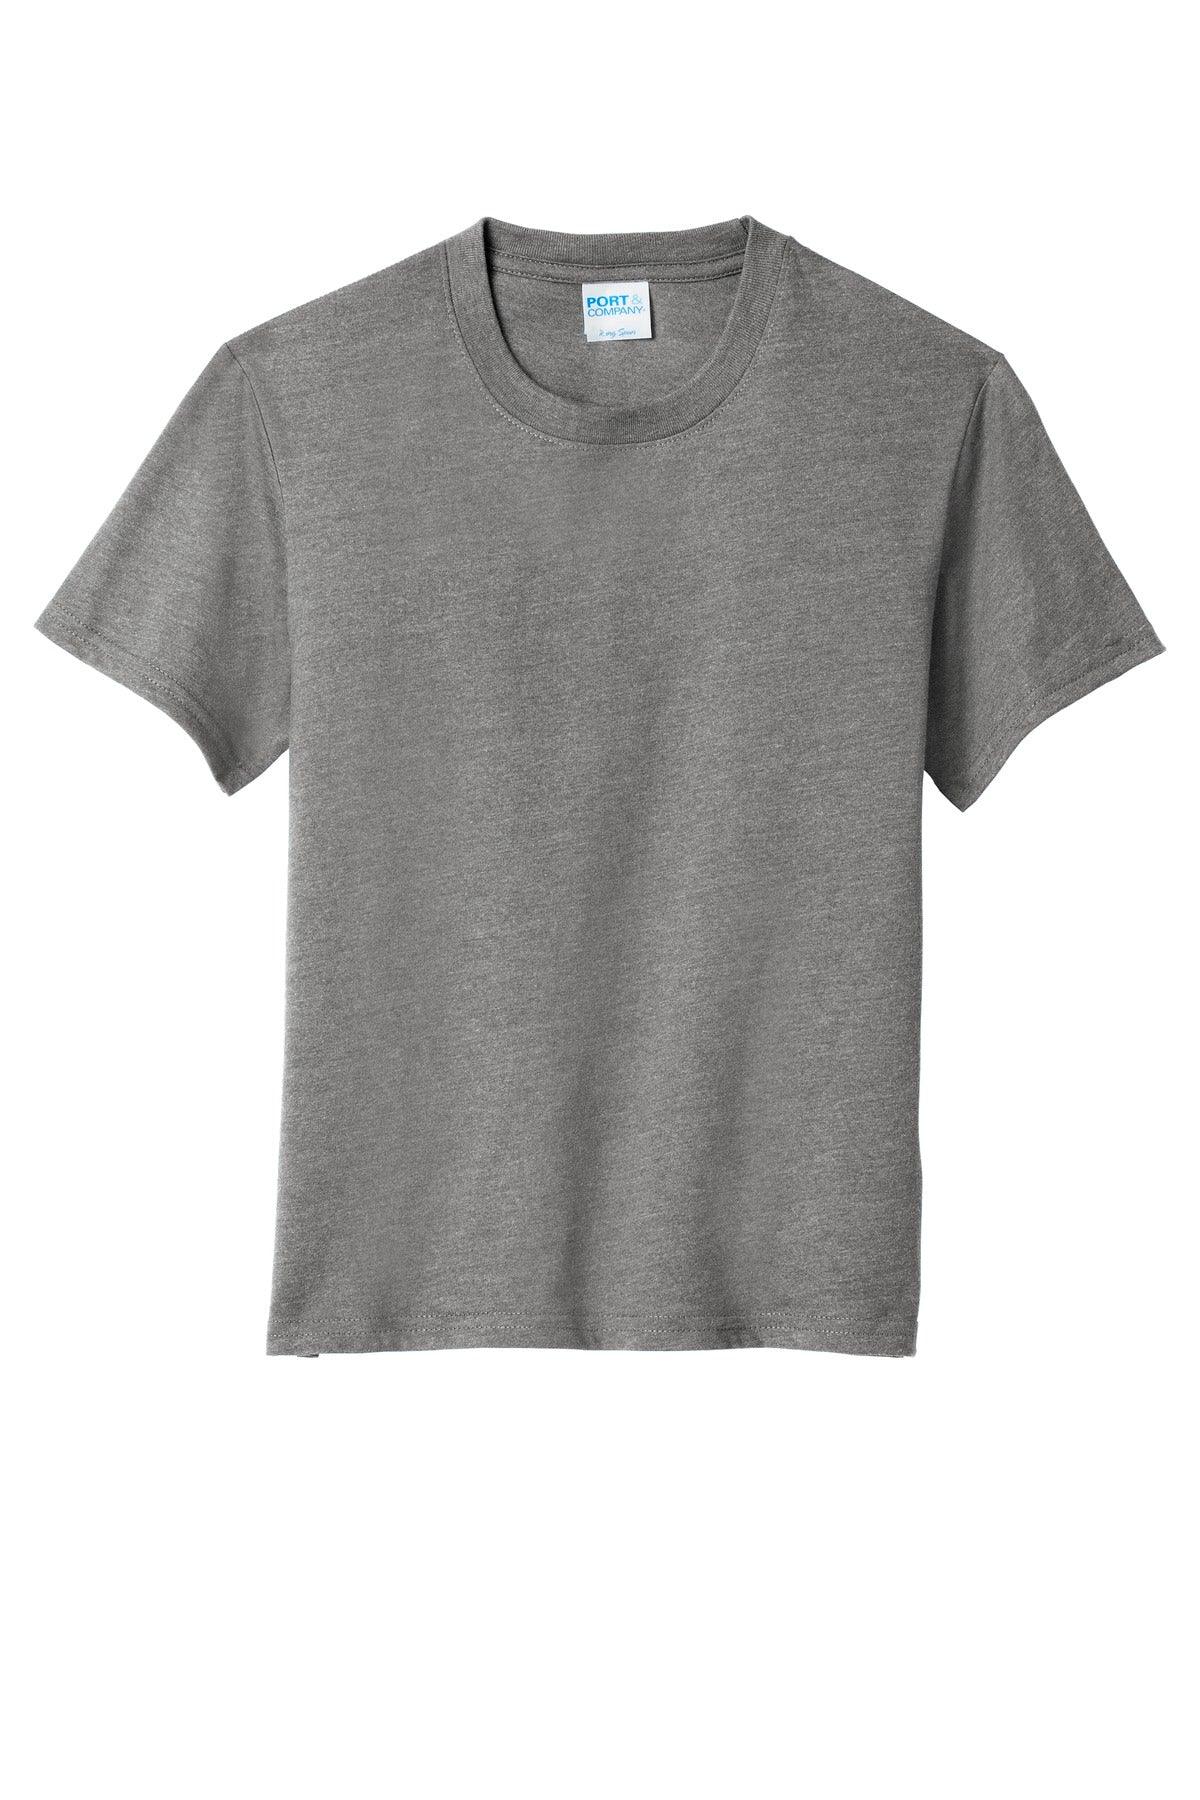 Port & Company Youth Fan Favorite Blend Tee. PC455Y - Dresses Max